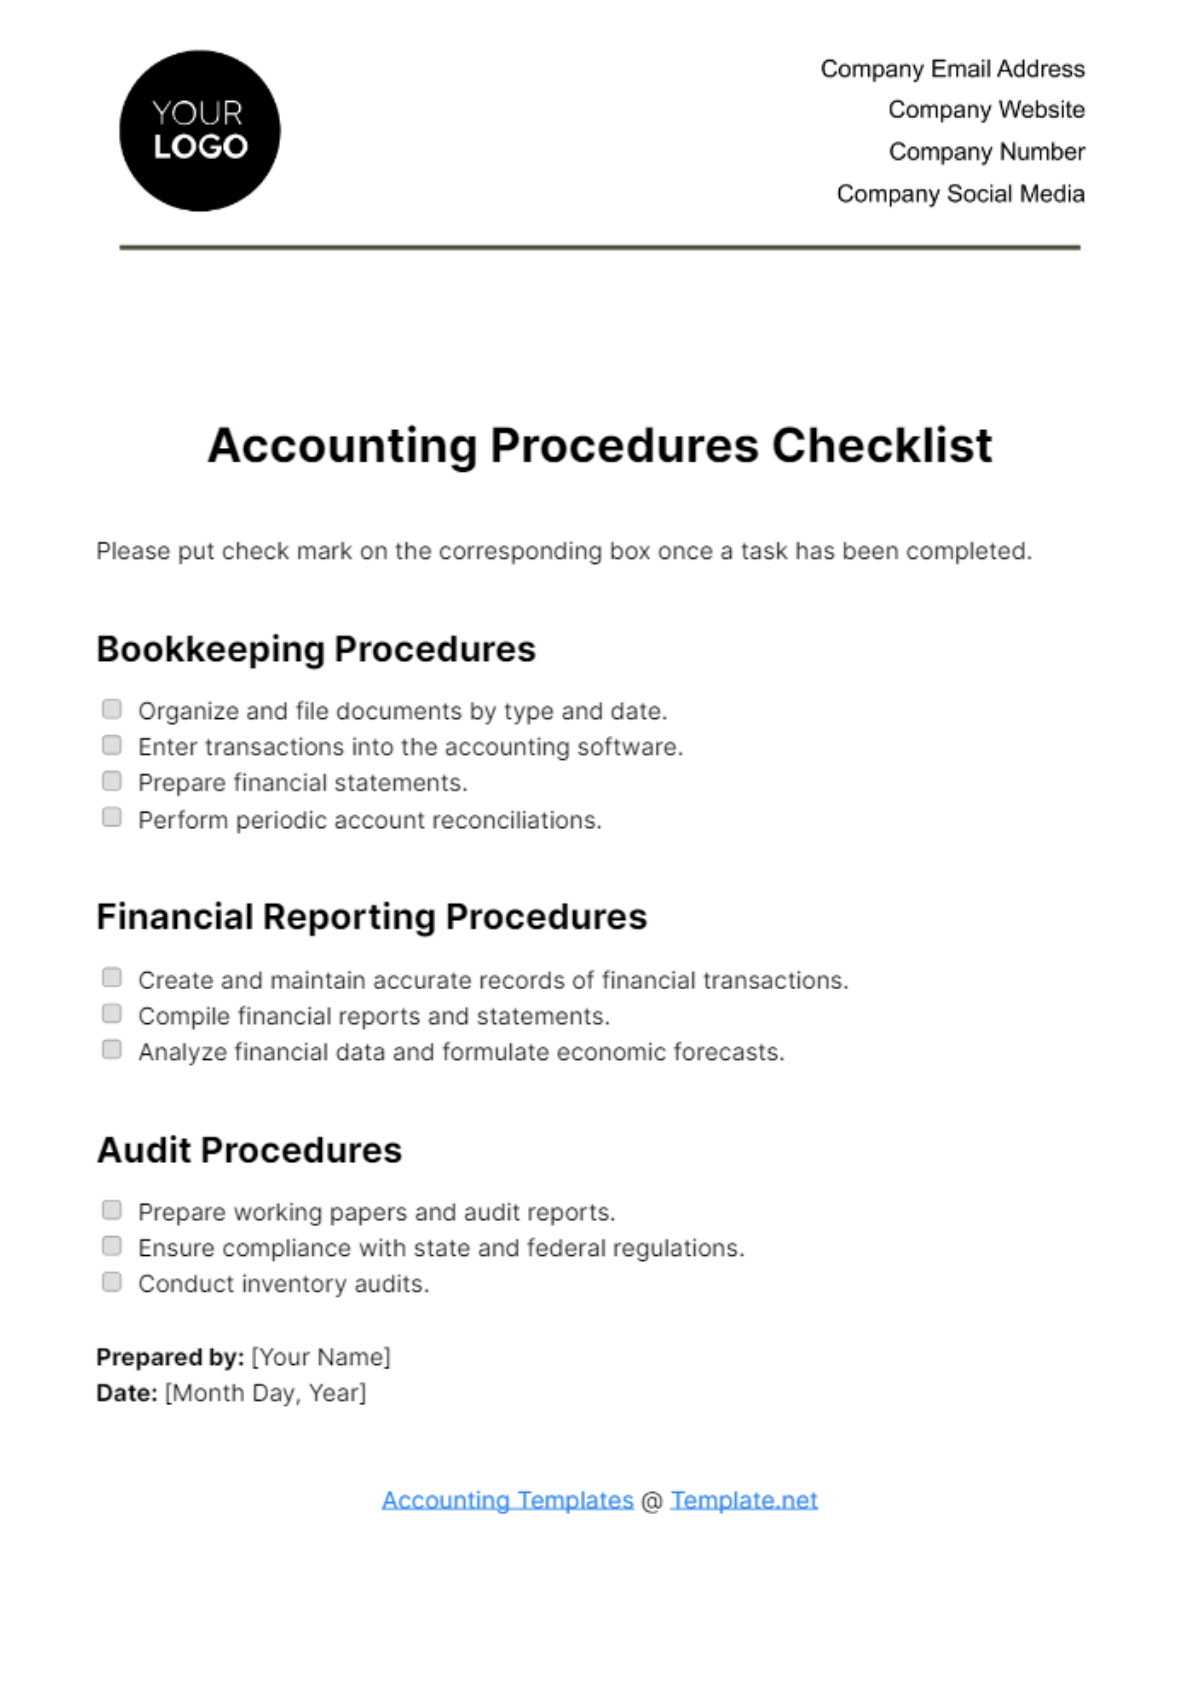 Accounting Procedures Checklist Template